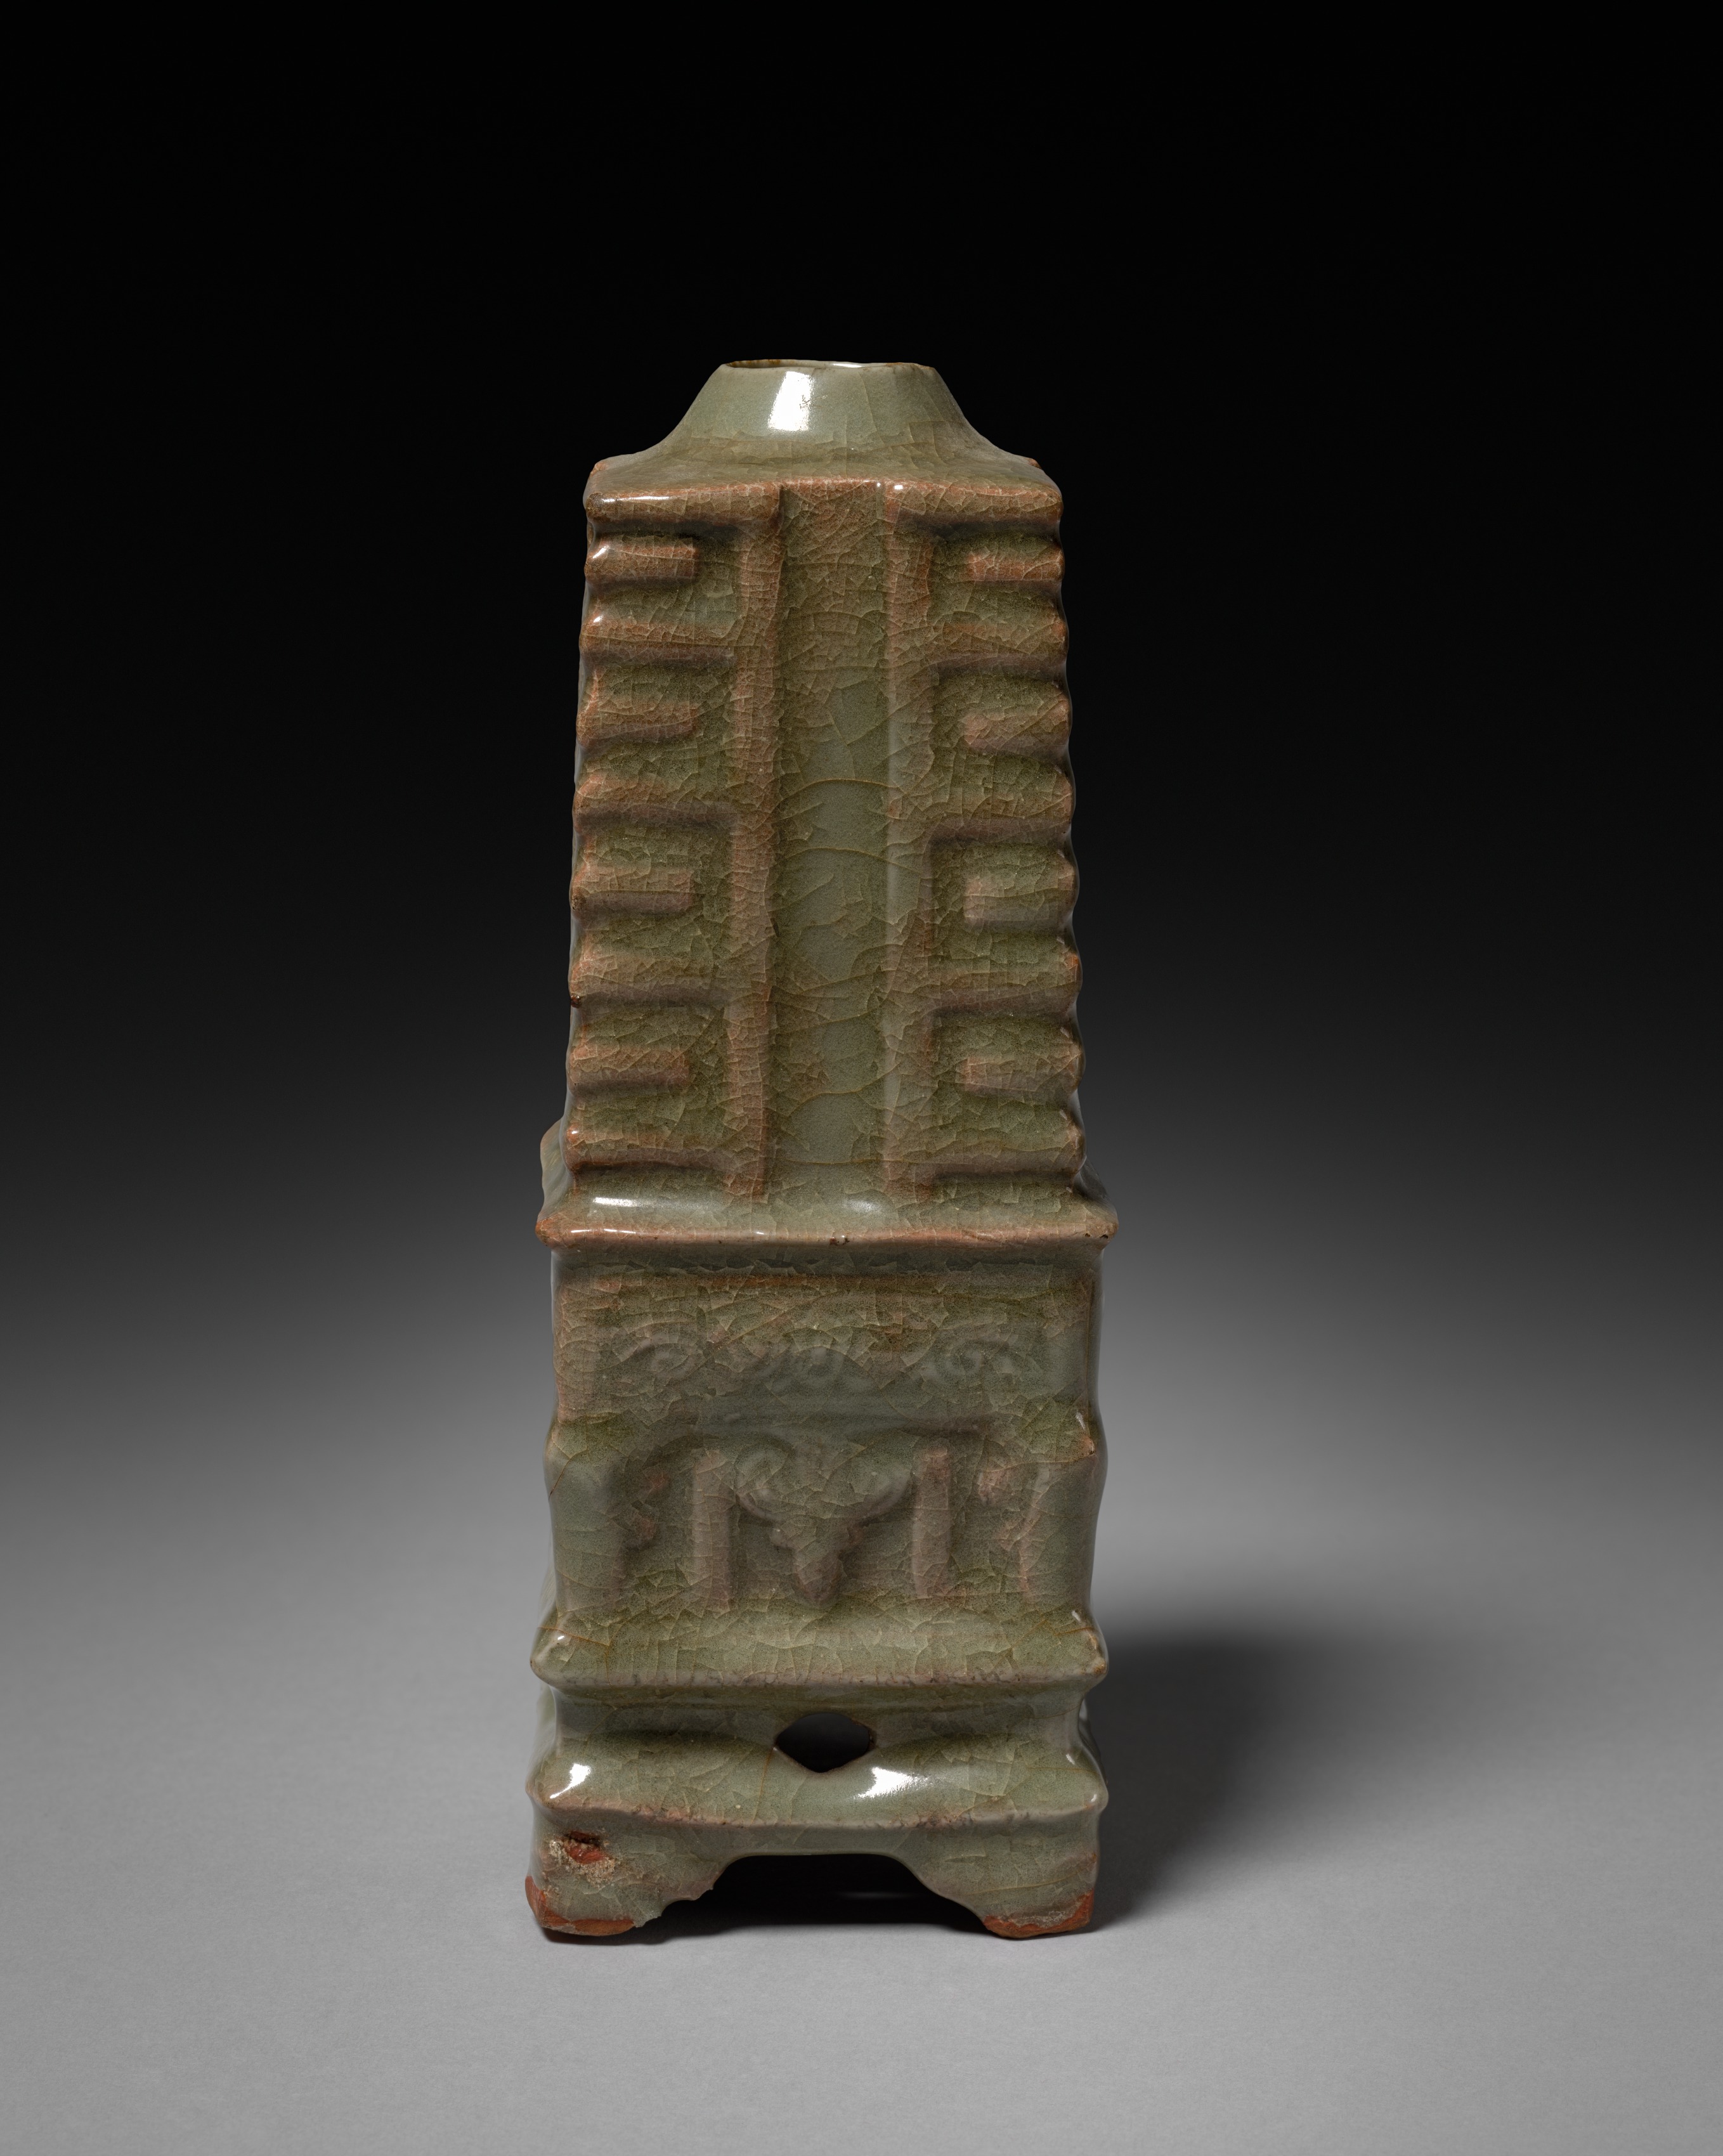 Vase in Shape of Cong: Southern Celadon Ware